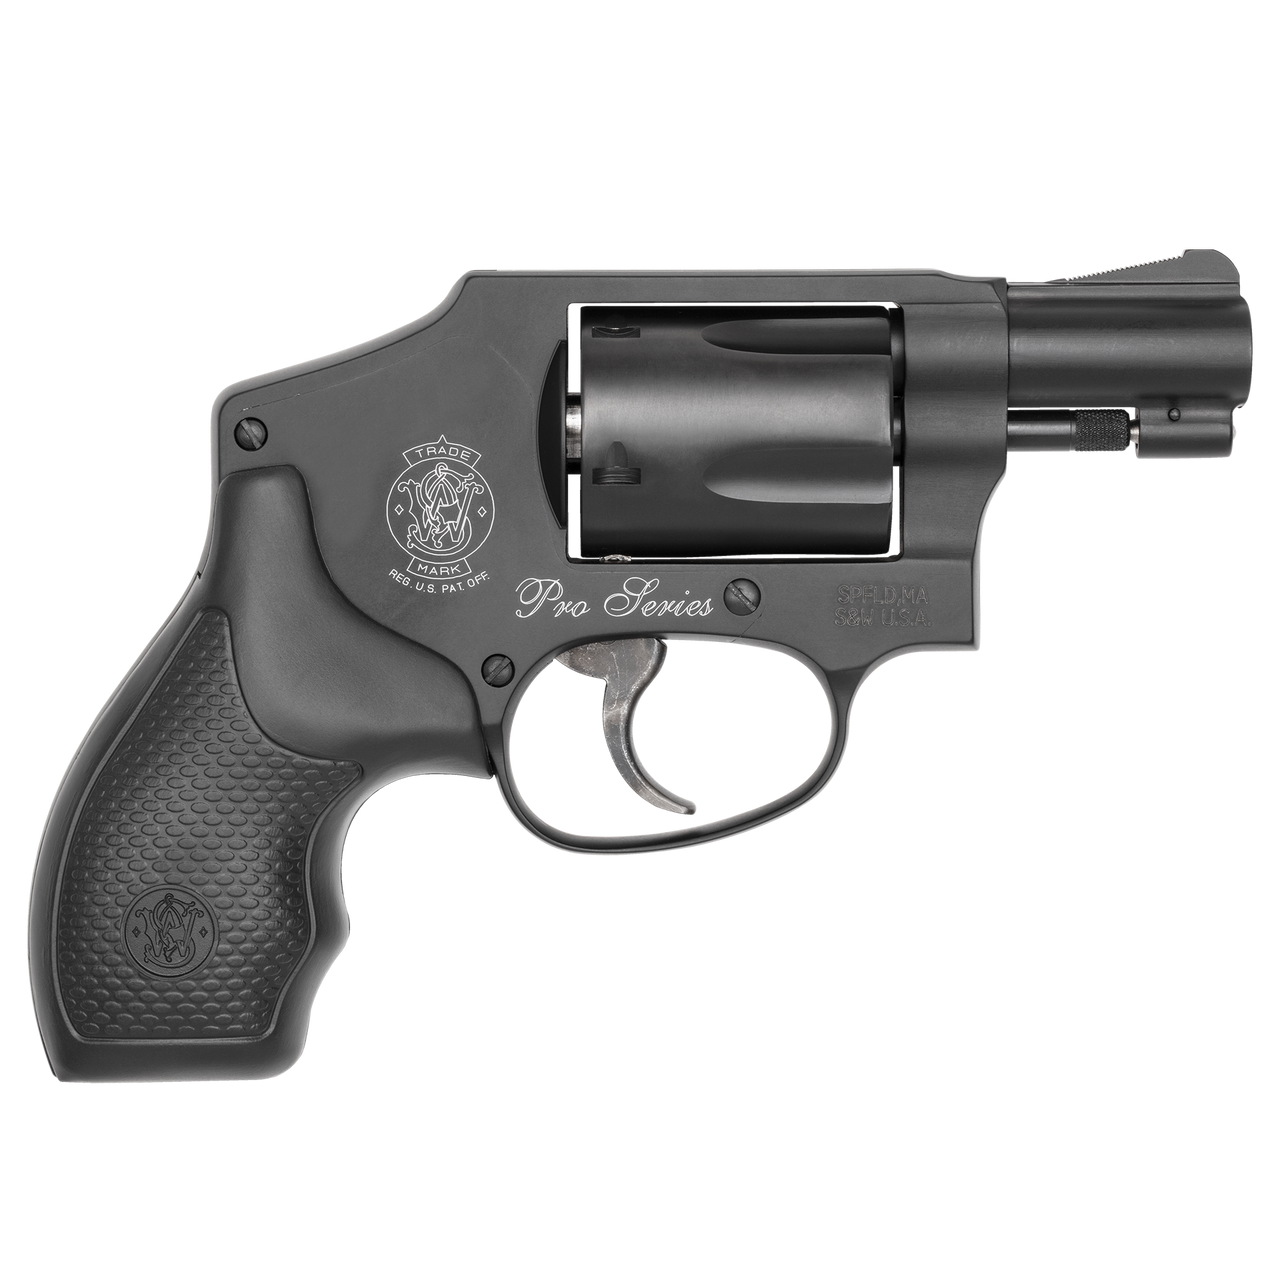 Buy Smith & Wesson Performance Center Pro Series Model 442 Moon Clip Revolver Online